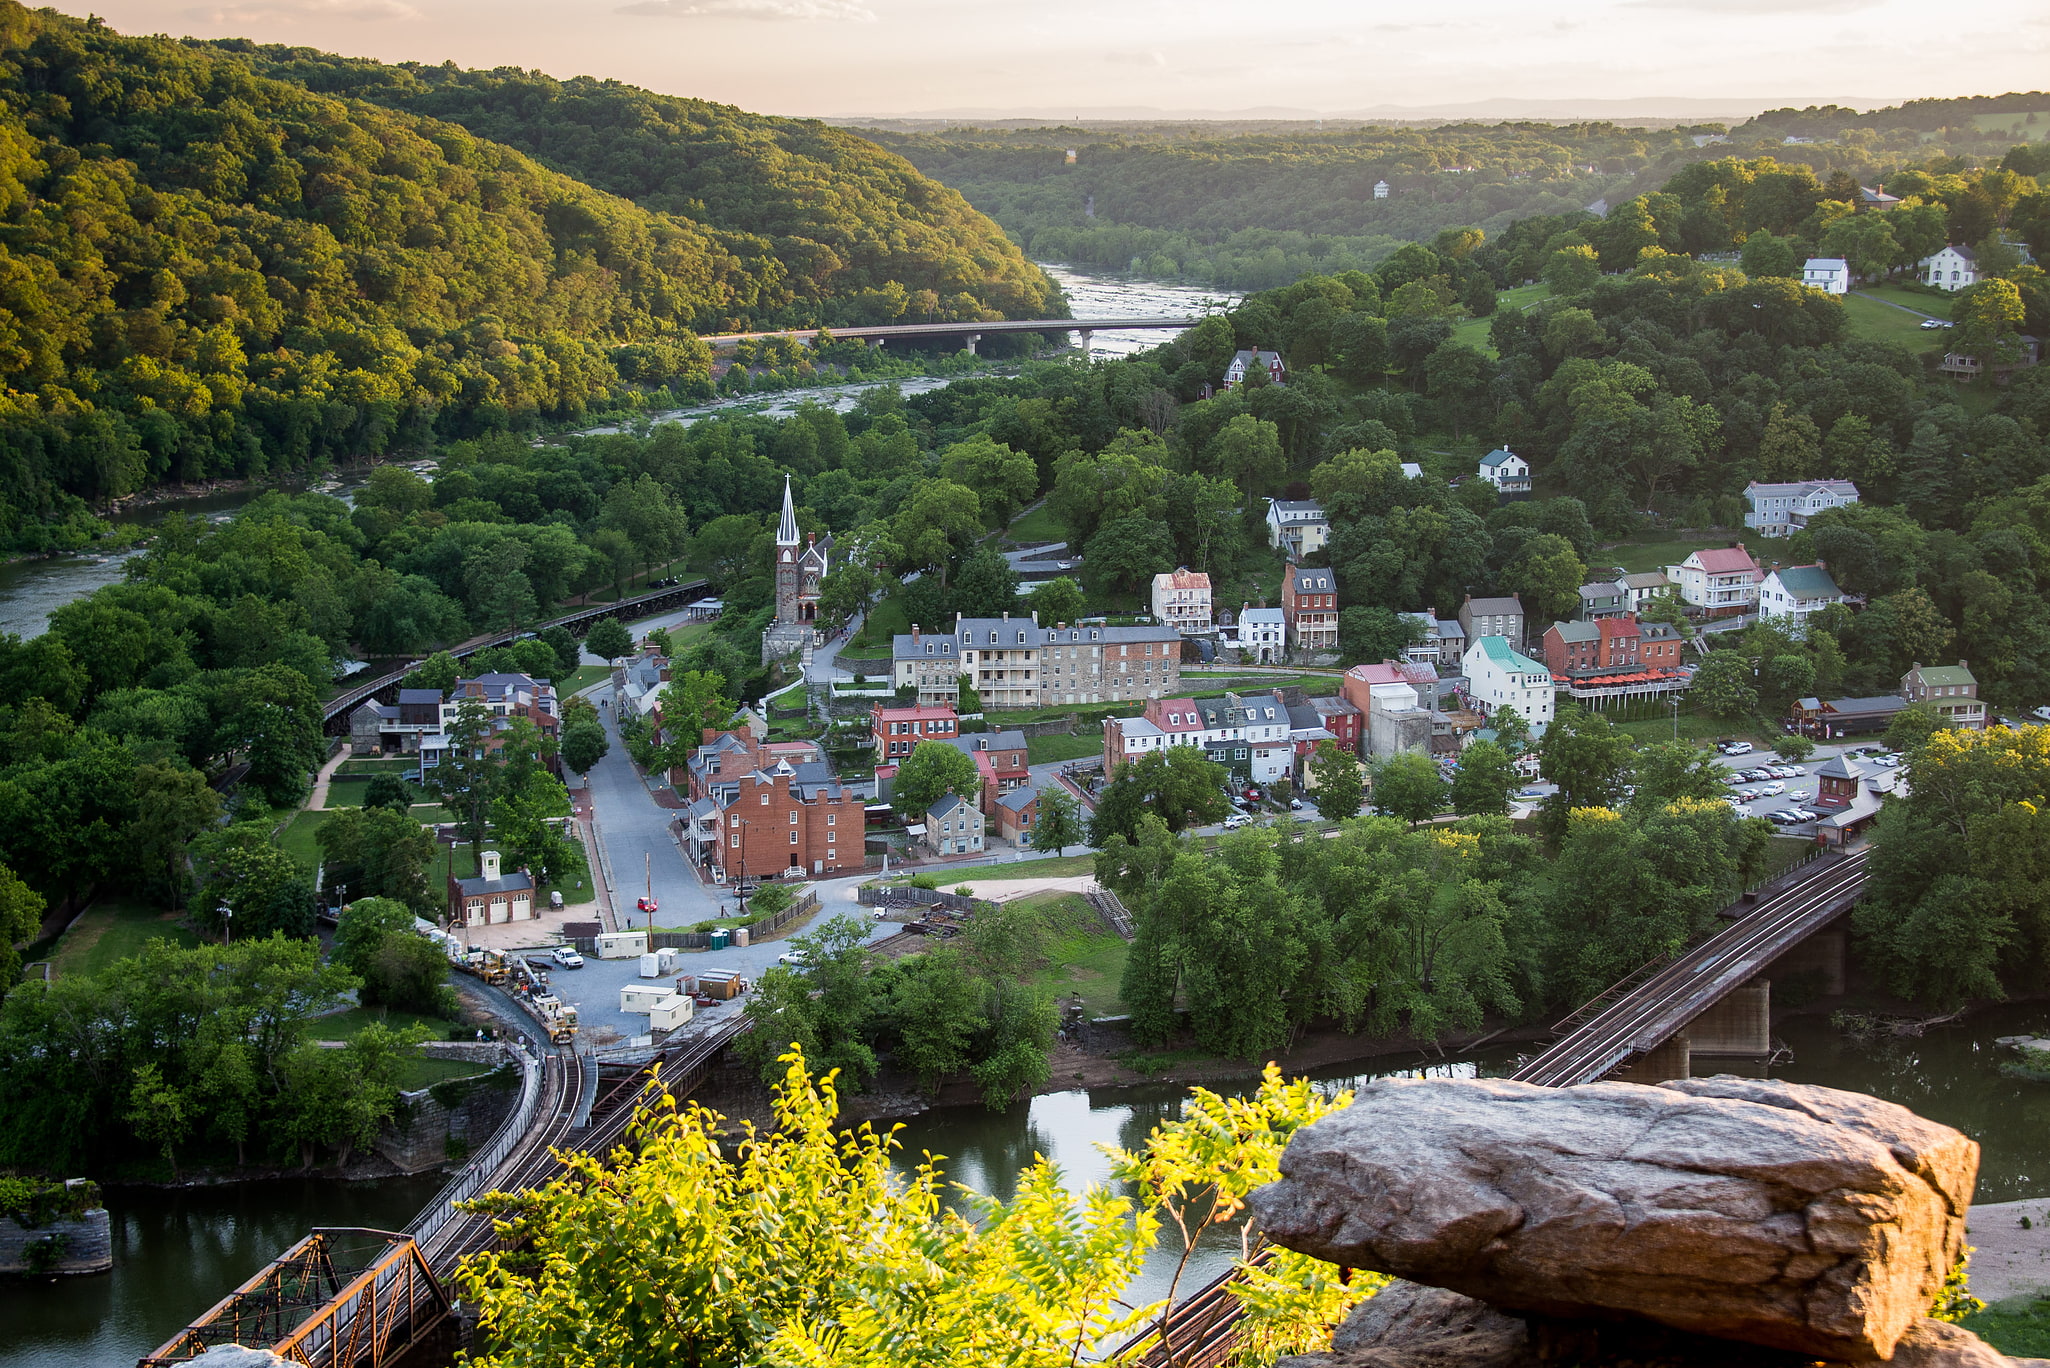 Harpers Ferry, United States